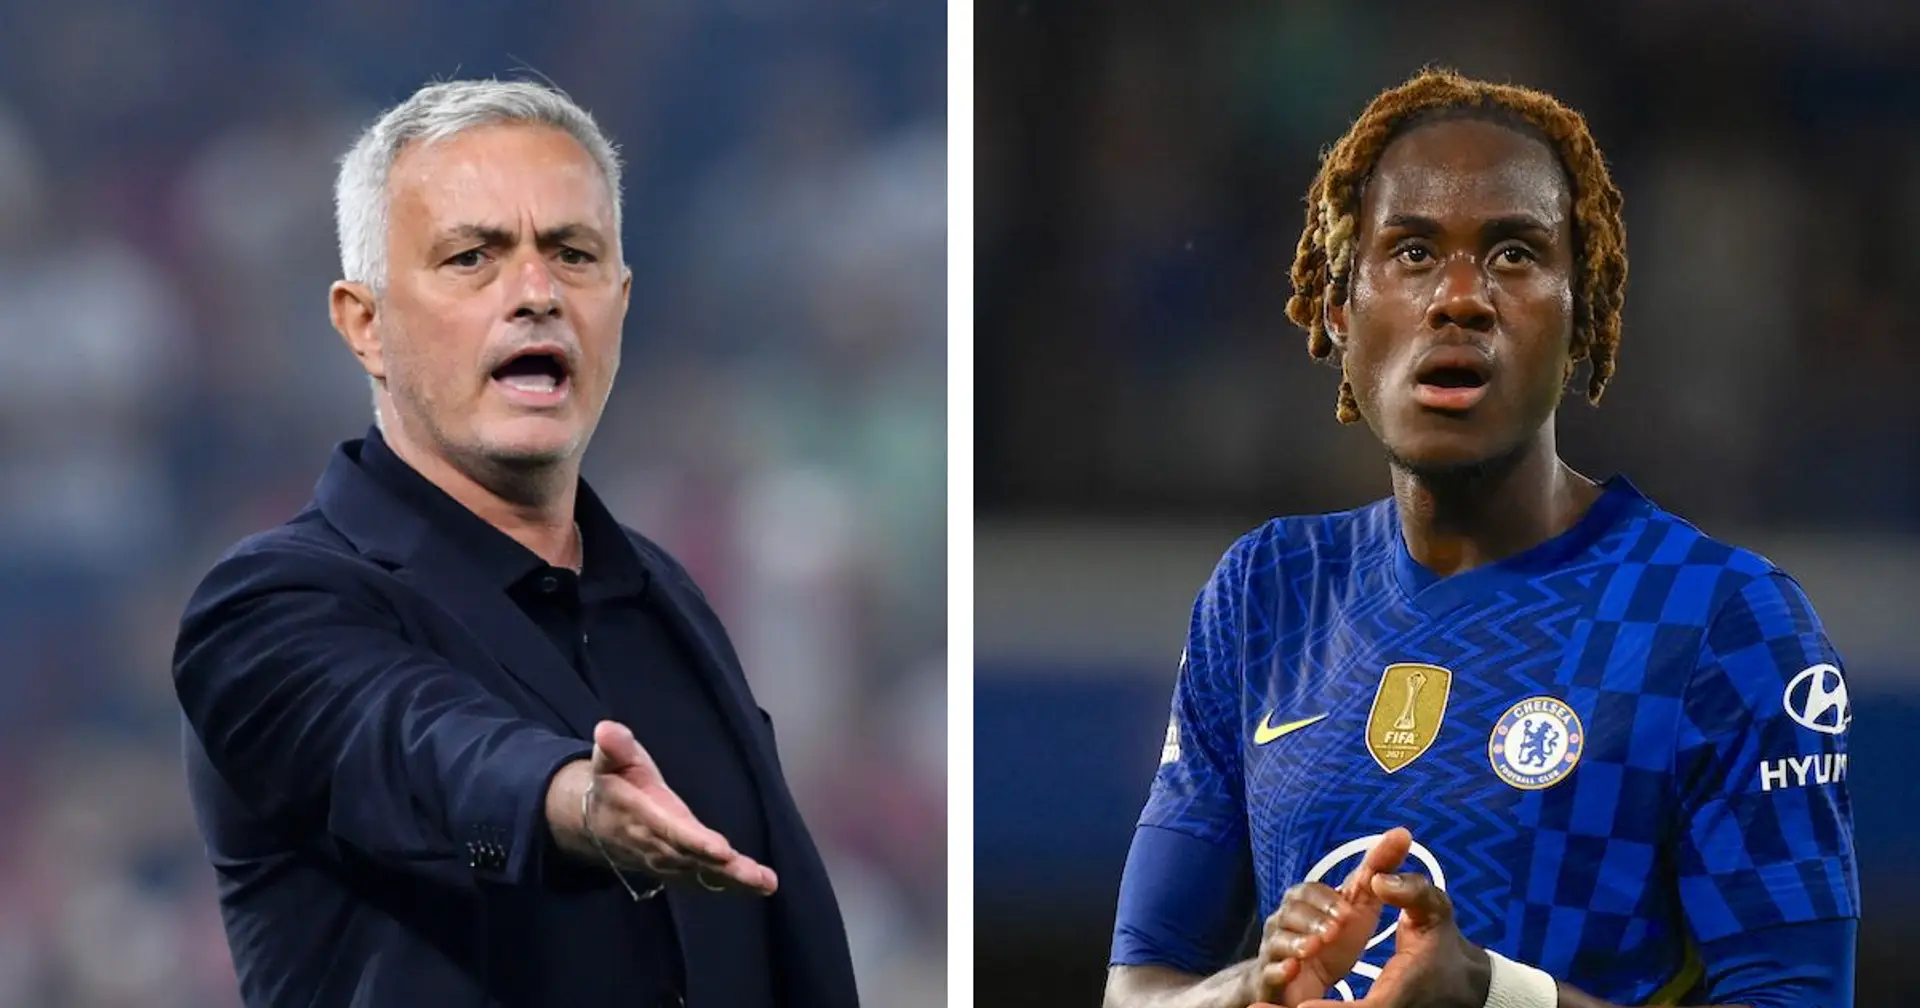 Mourinho wants Chalobah on loan and 3 more big stories you might've missed